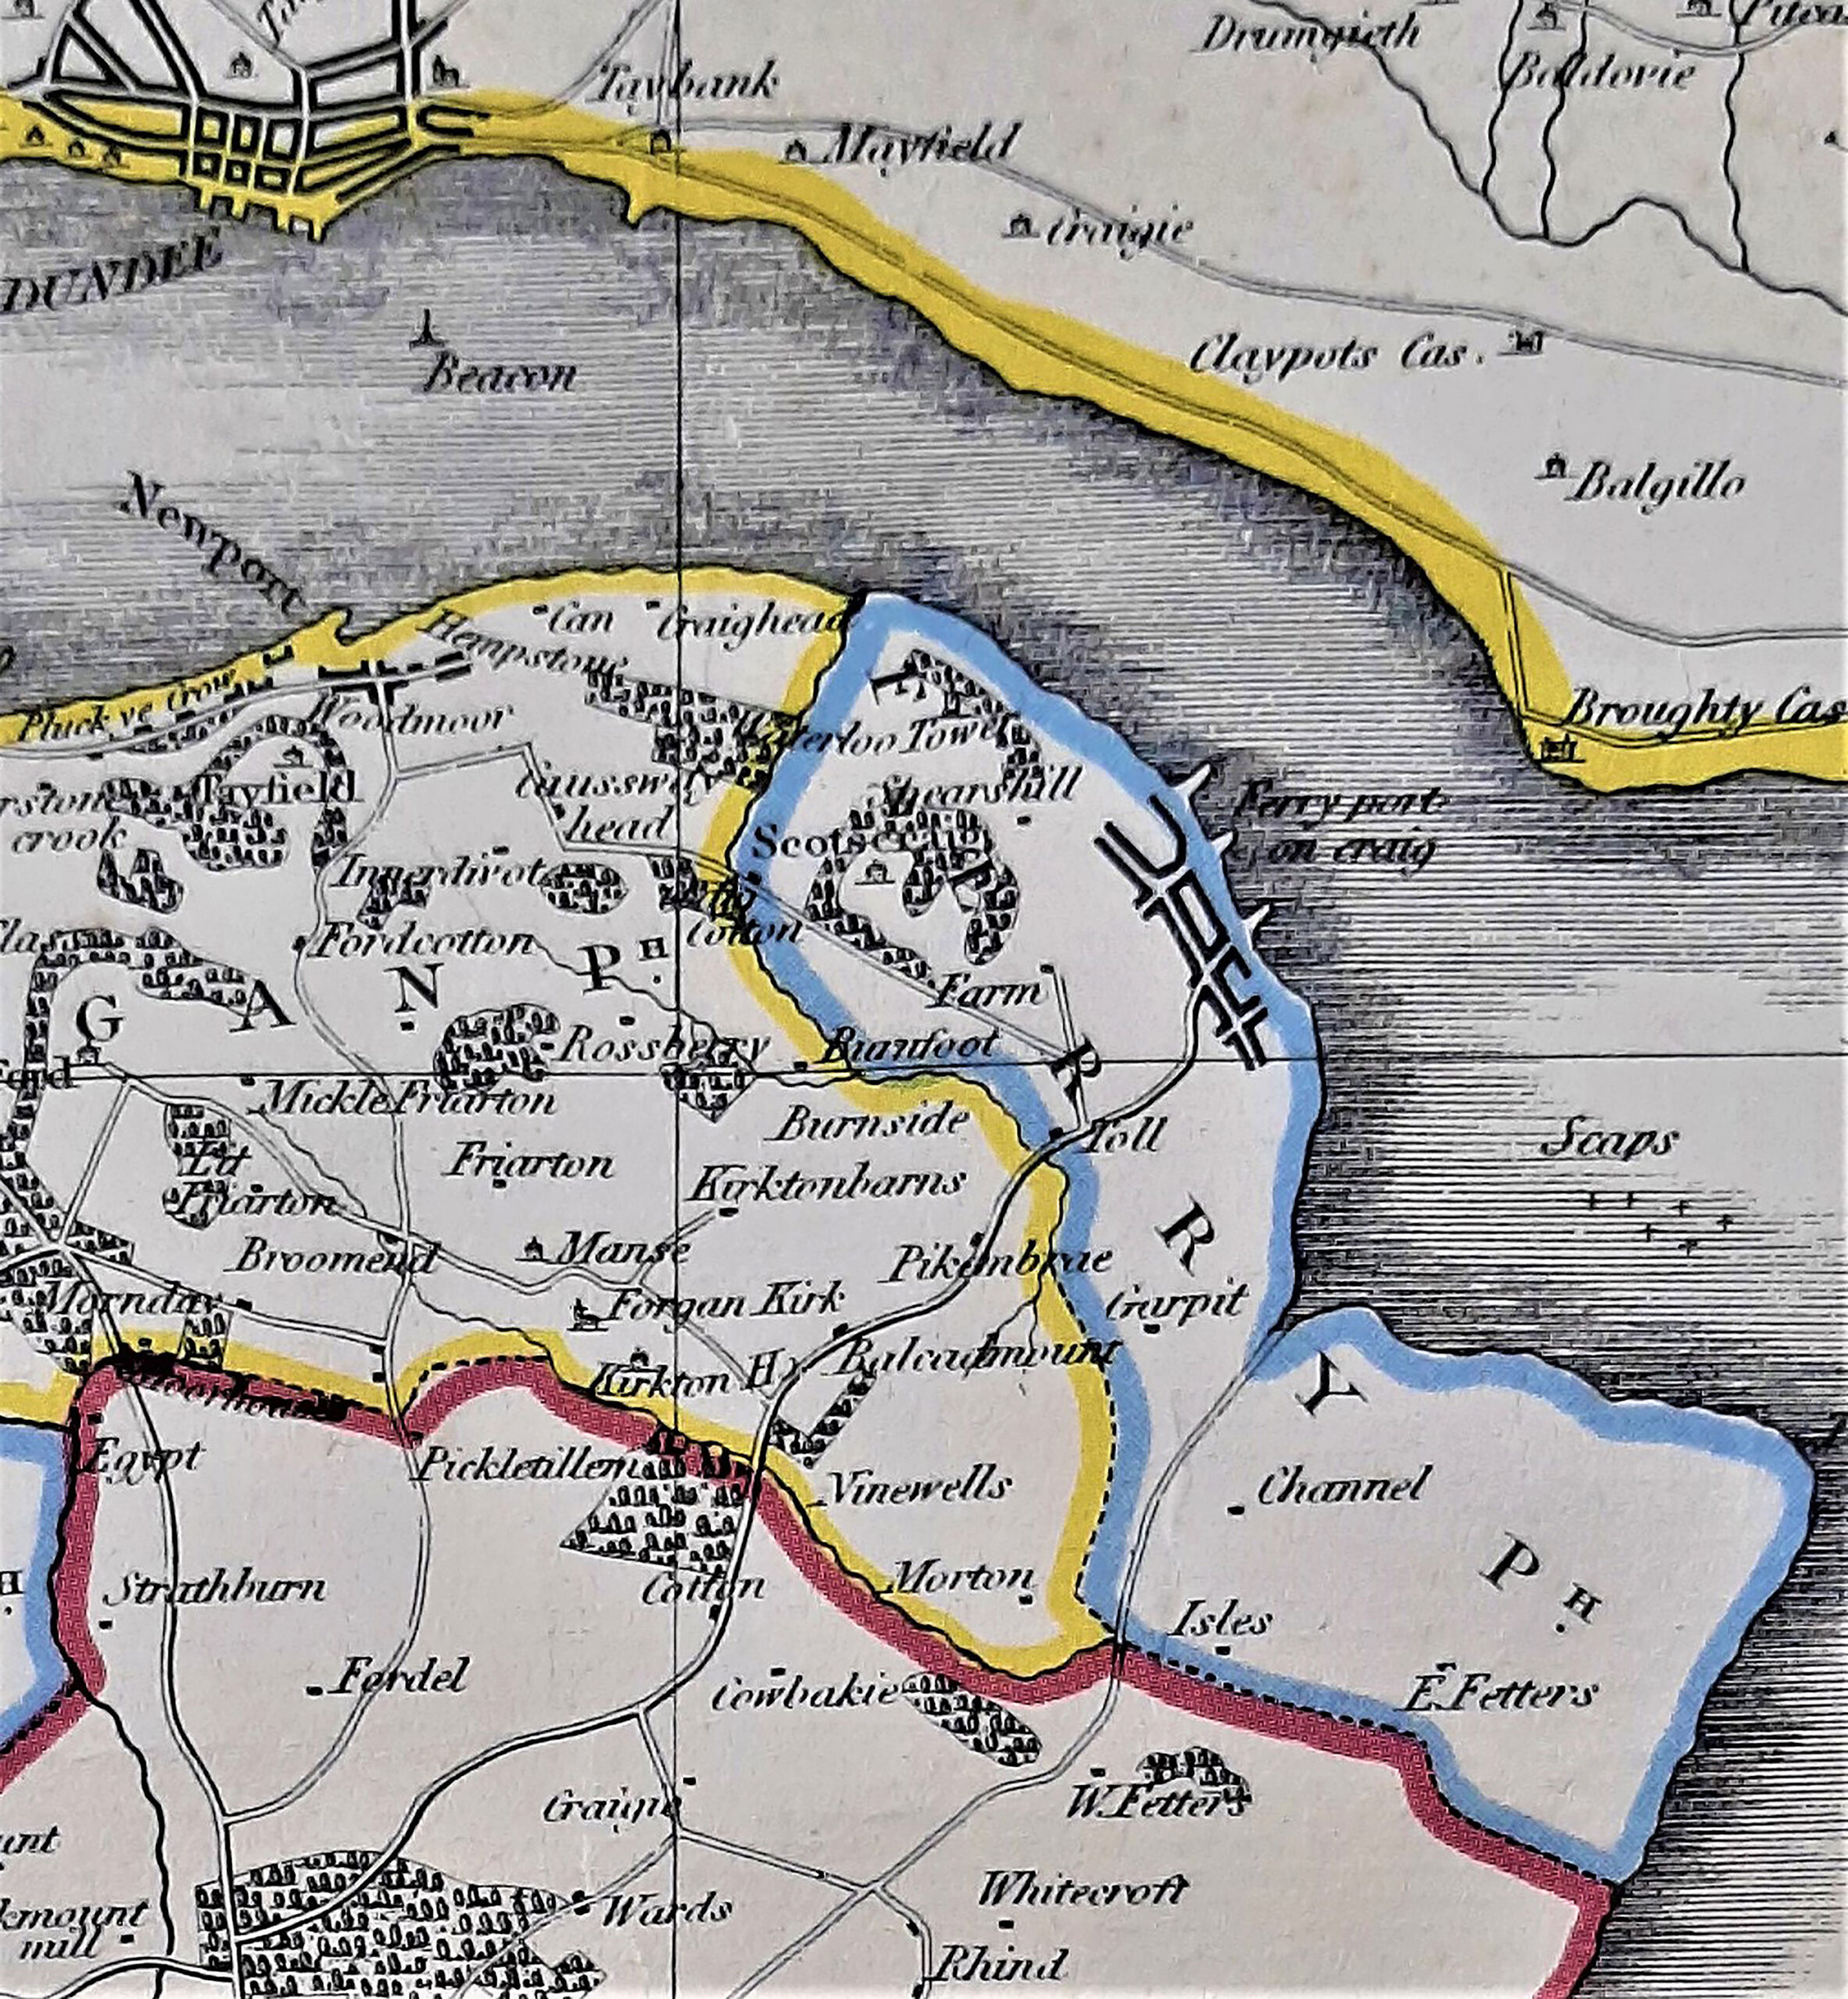 Tayport Heritage Trail - Board 13 - Old road to Maryton 1827 by Craig Cotton & Caussway head